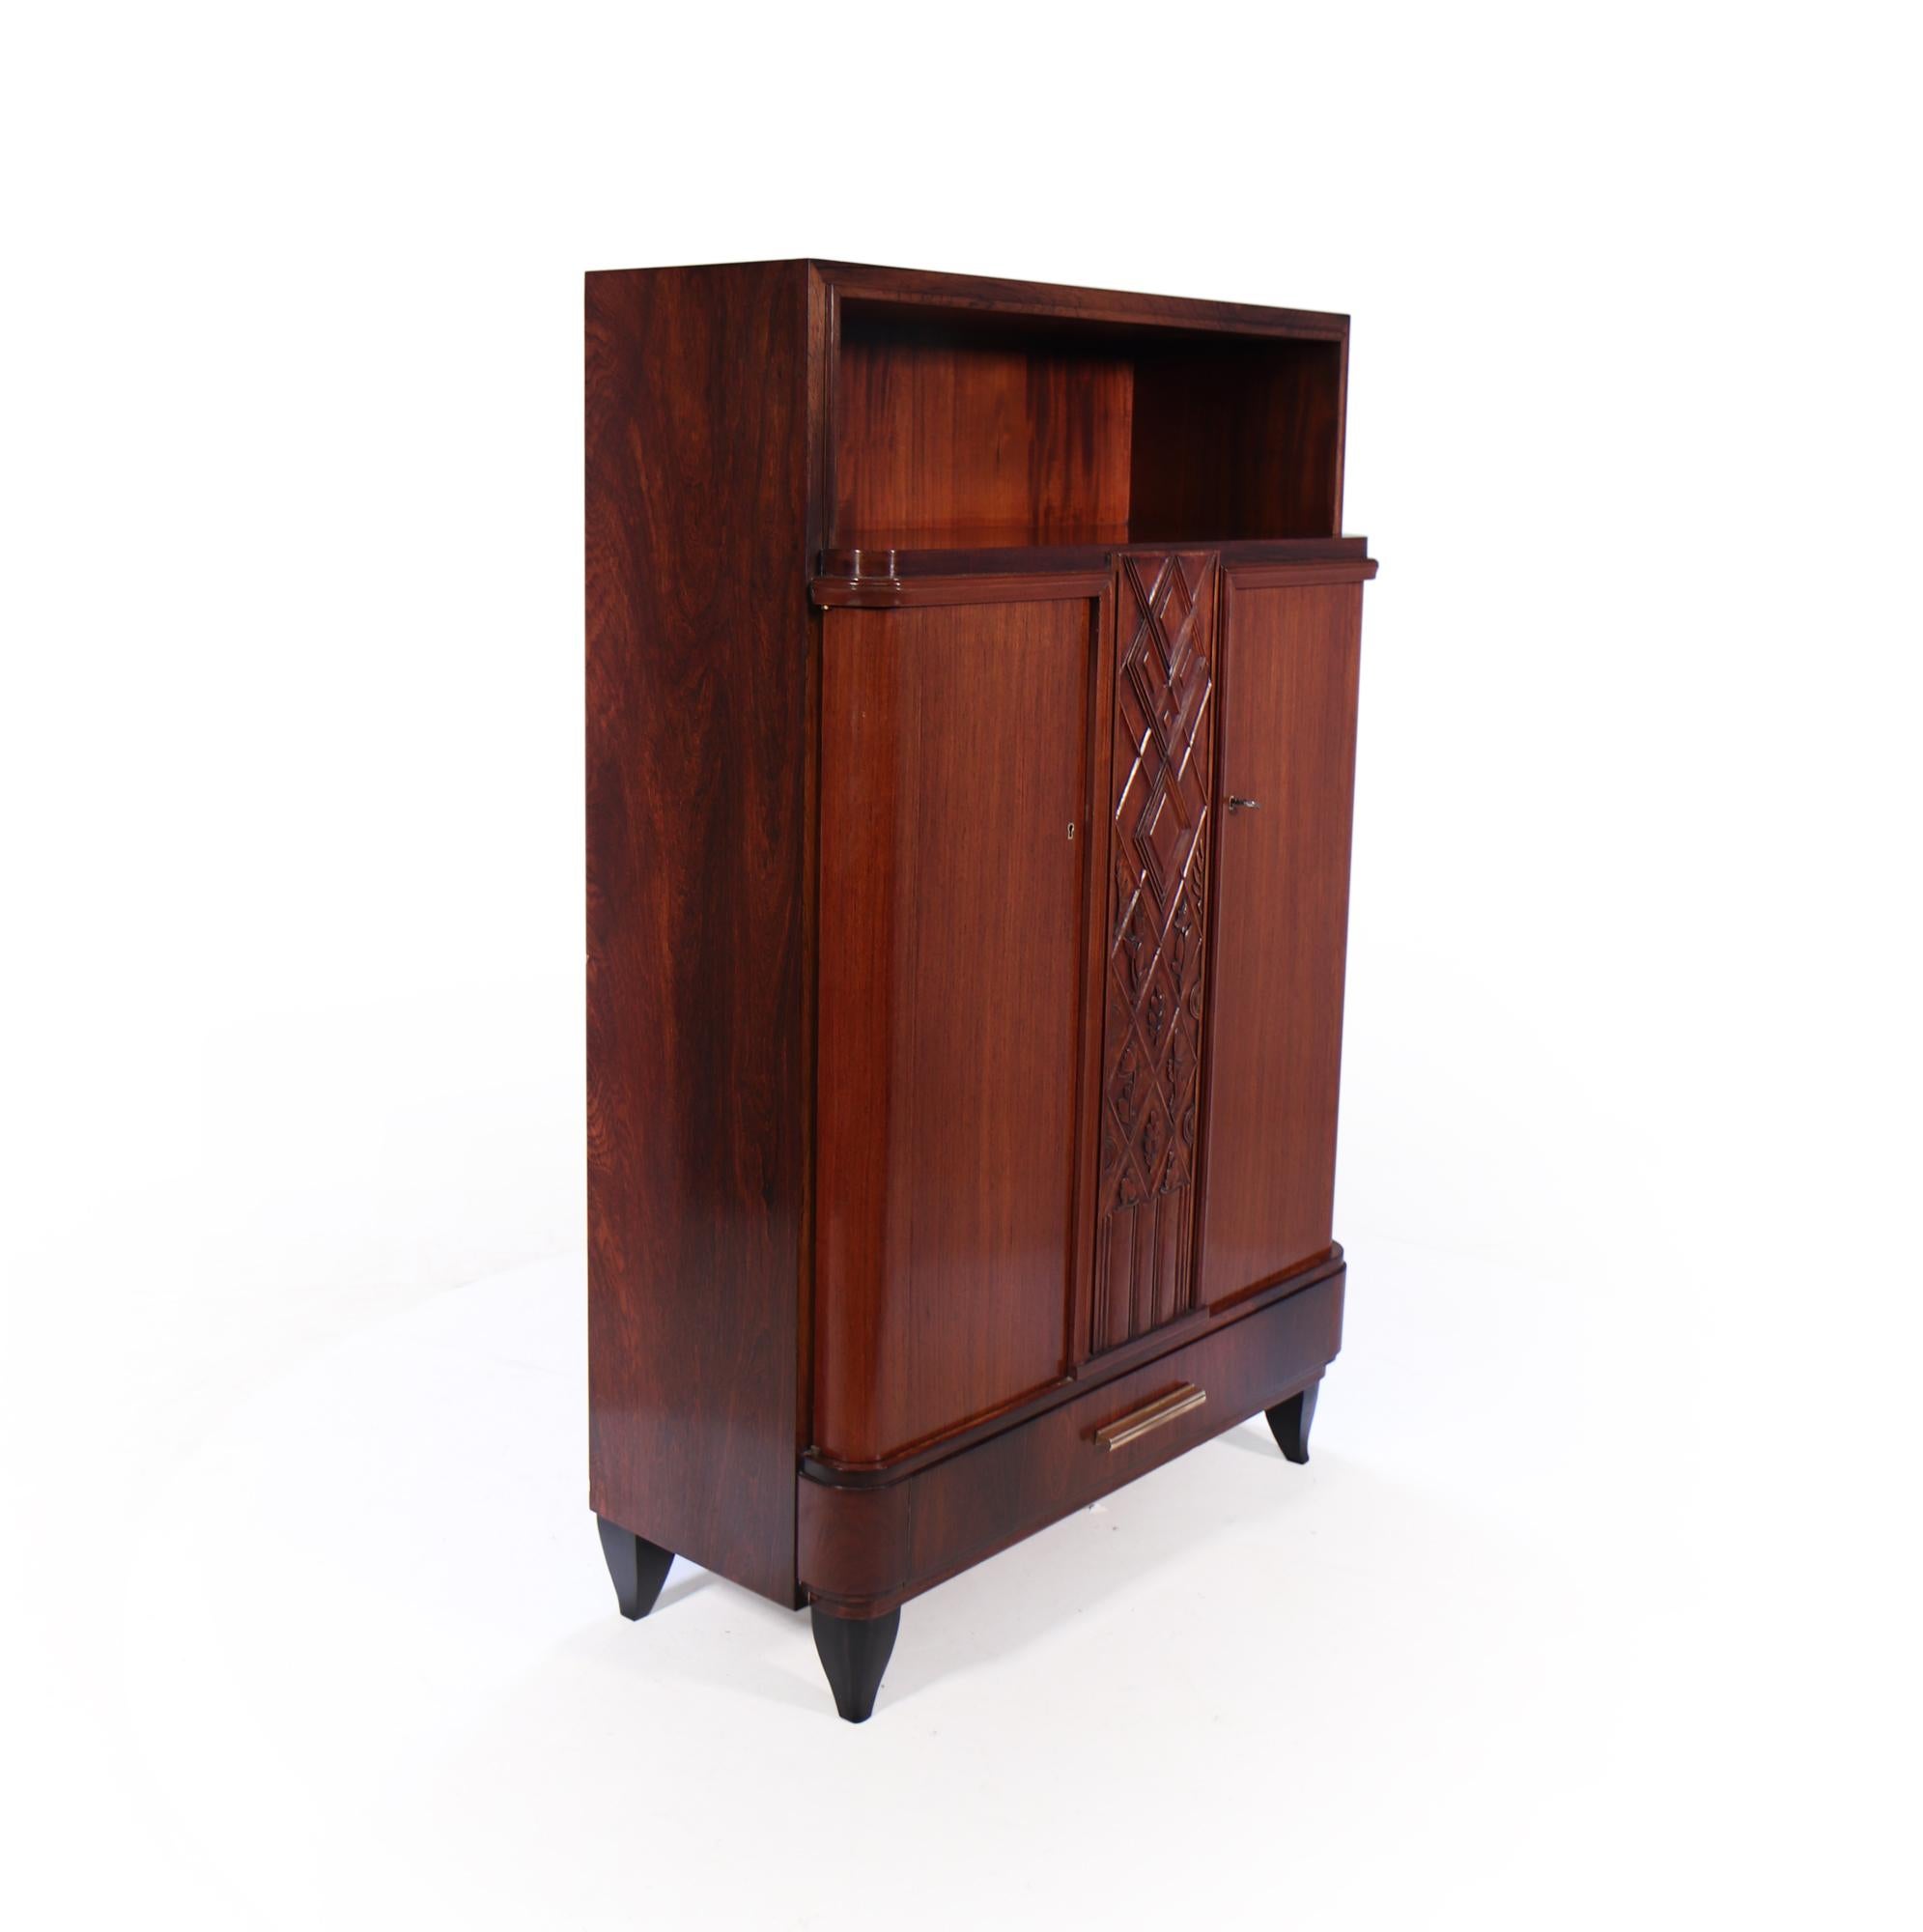 Early 20th Century French Art Deco Rosewood Cabinet For Sale